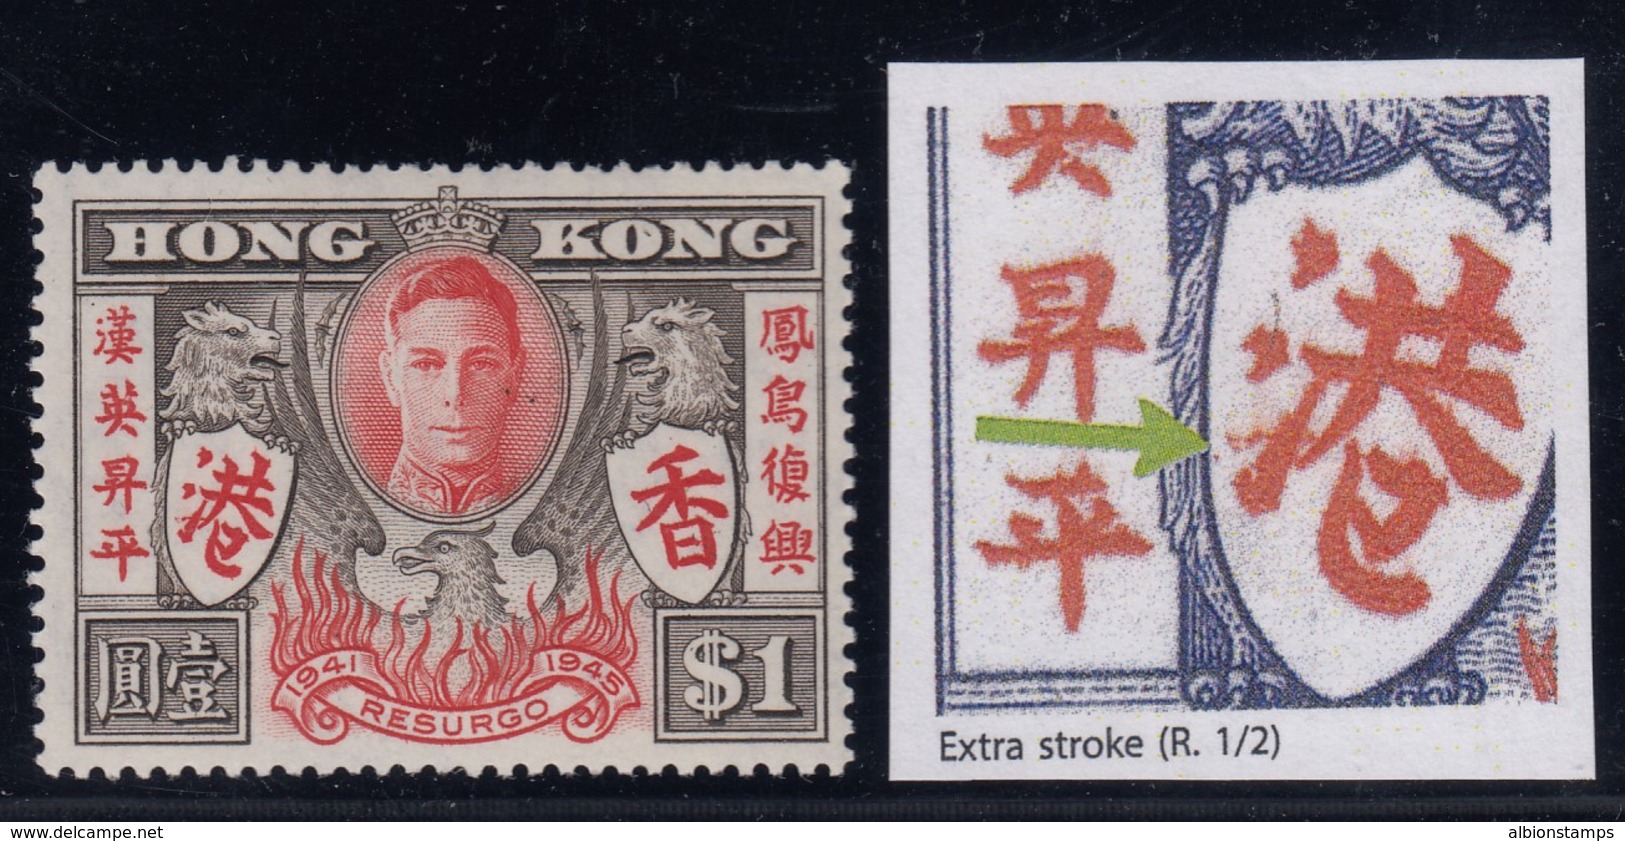 Hong Kong, SG 170a, MLH, "Extra Stroke" Variety - Unused Stamps